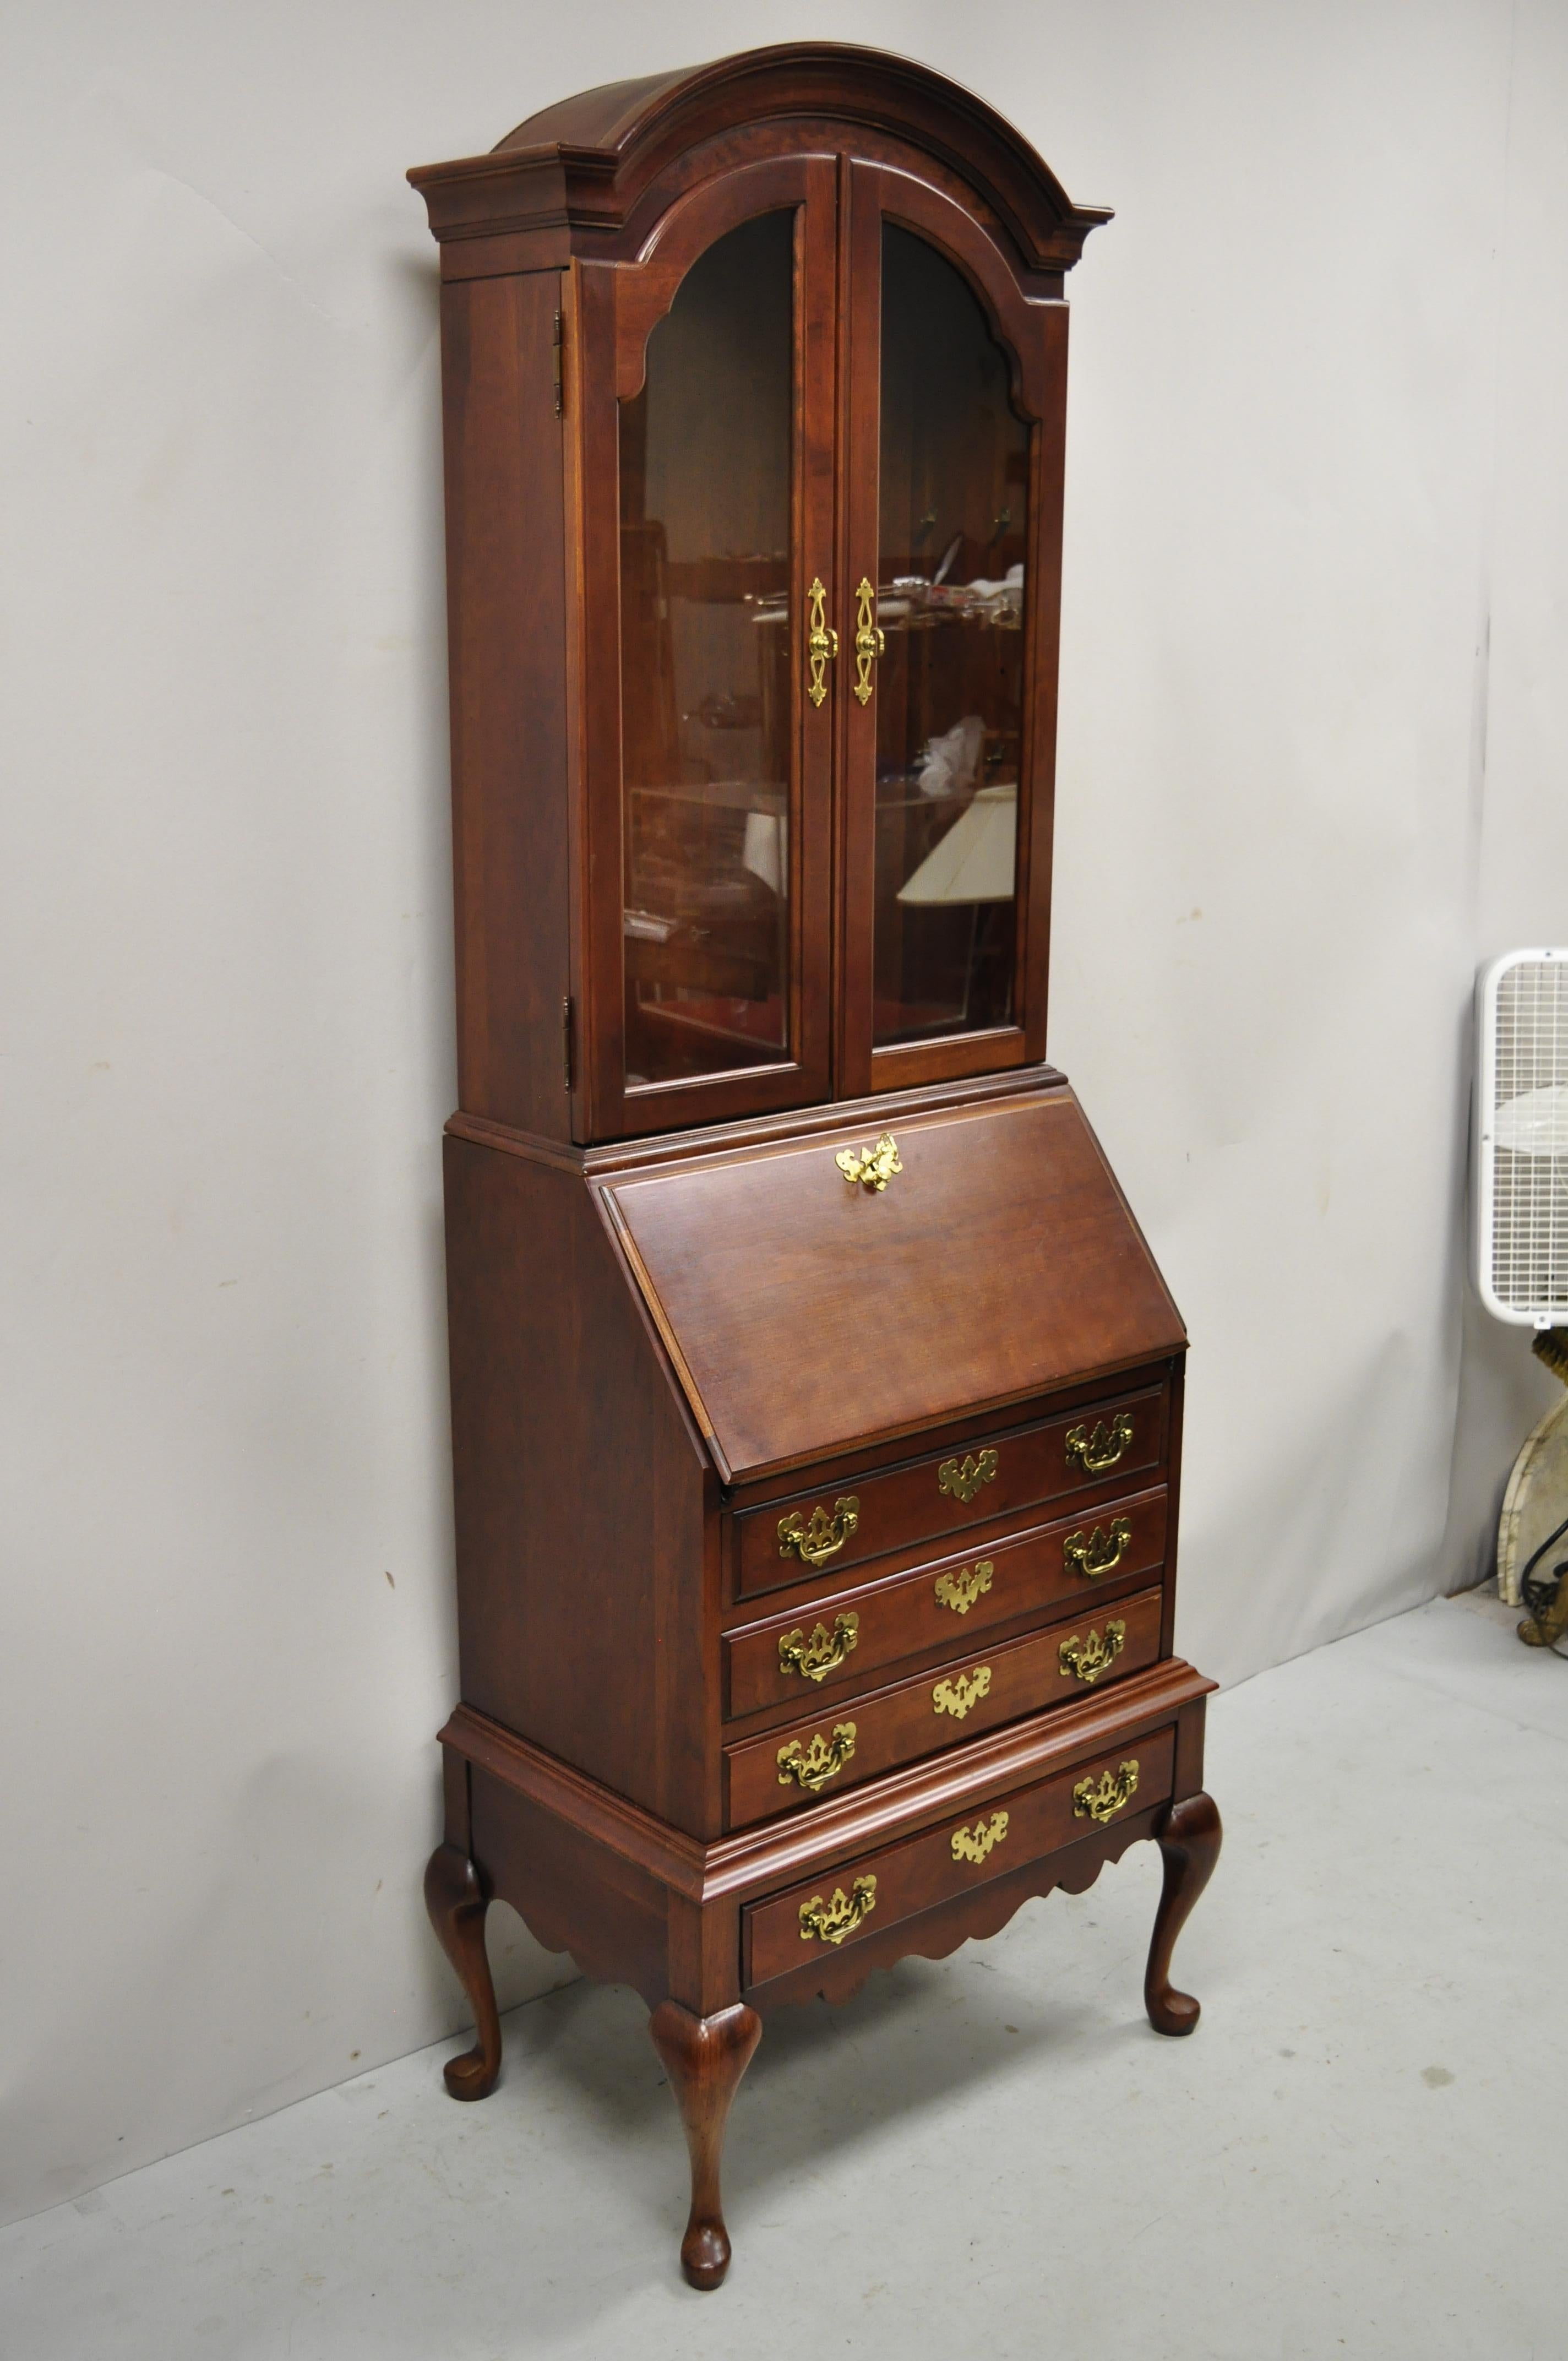 Jasper cabinet Co. cherry wood Queen Anne secretary desk display cabinet Curio. Item features bonnet top, solid wood construction, beautiful wood grain, 2 part construction, lighted interior, 2 swing doors, original label, working lock and key, 4